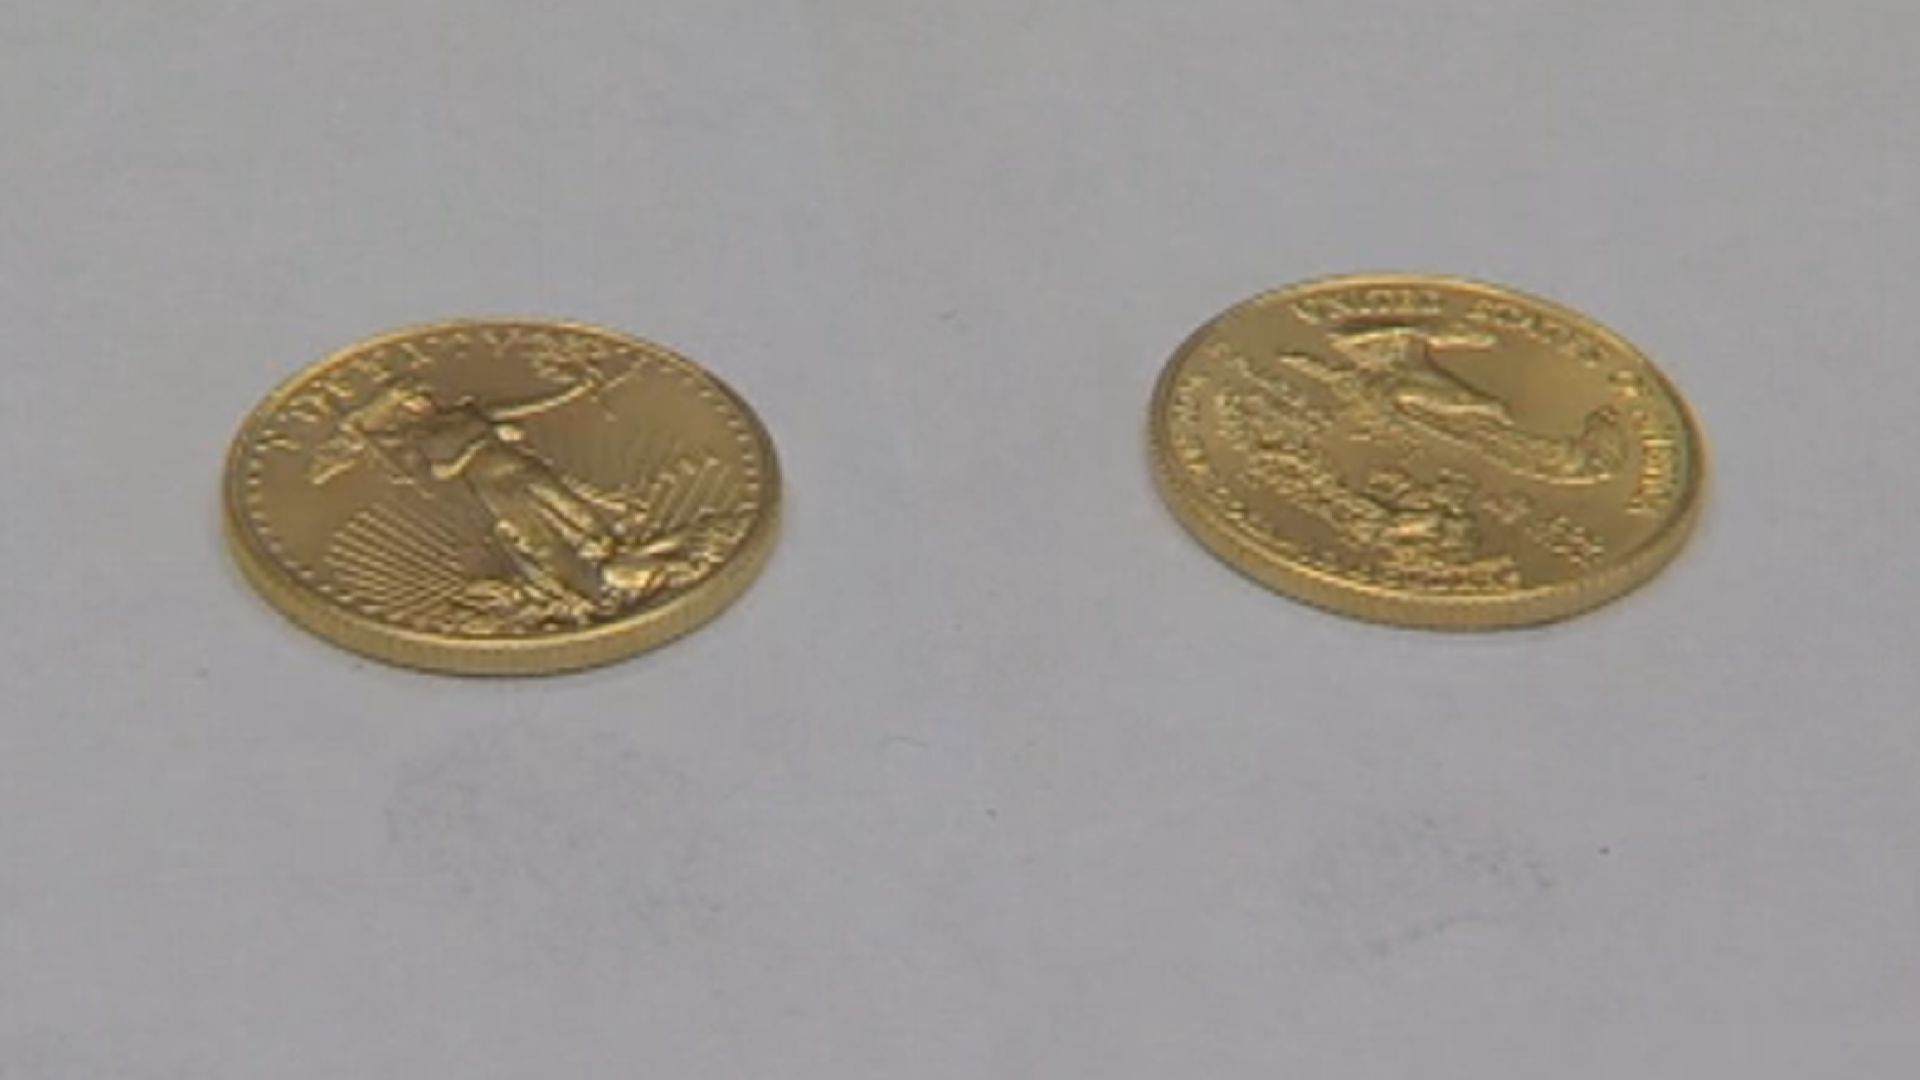 Donor drops gold coins in Salvation Army kettles